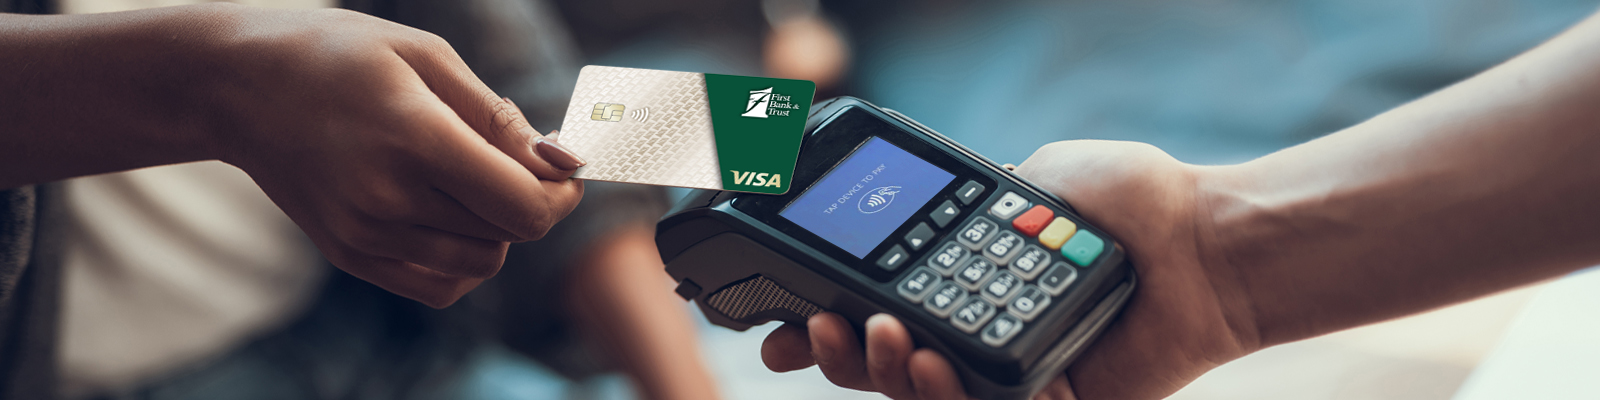 using contactless credit card on transaction